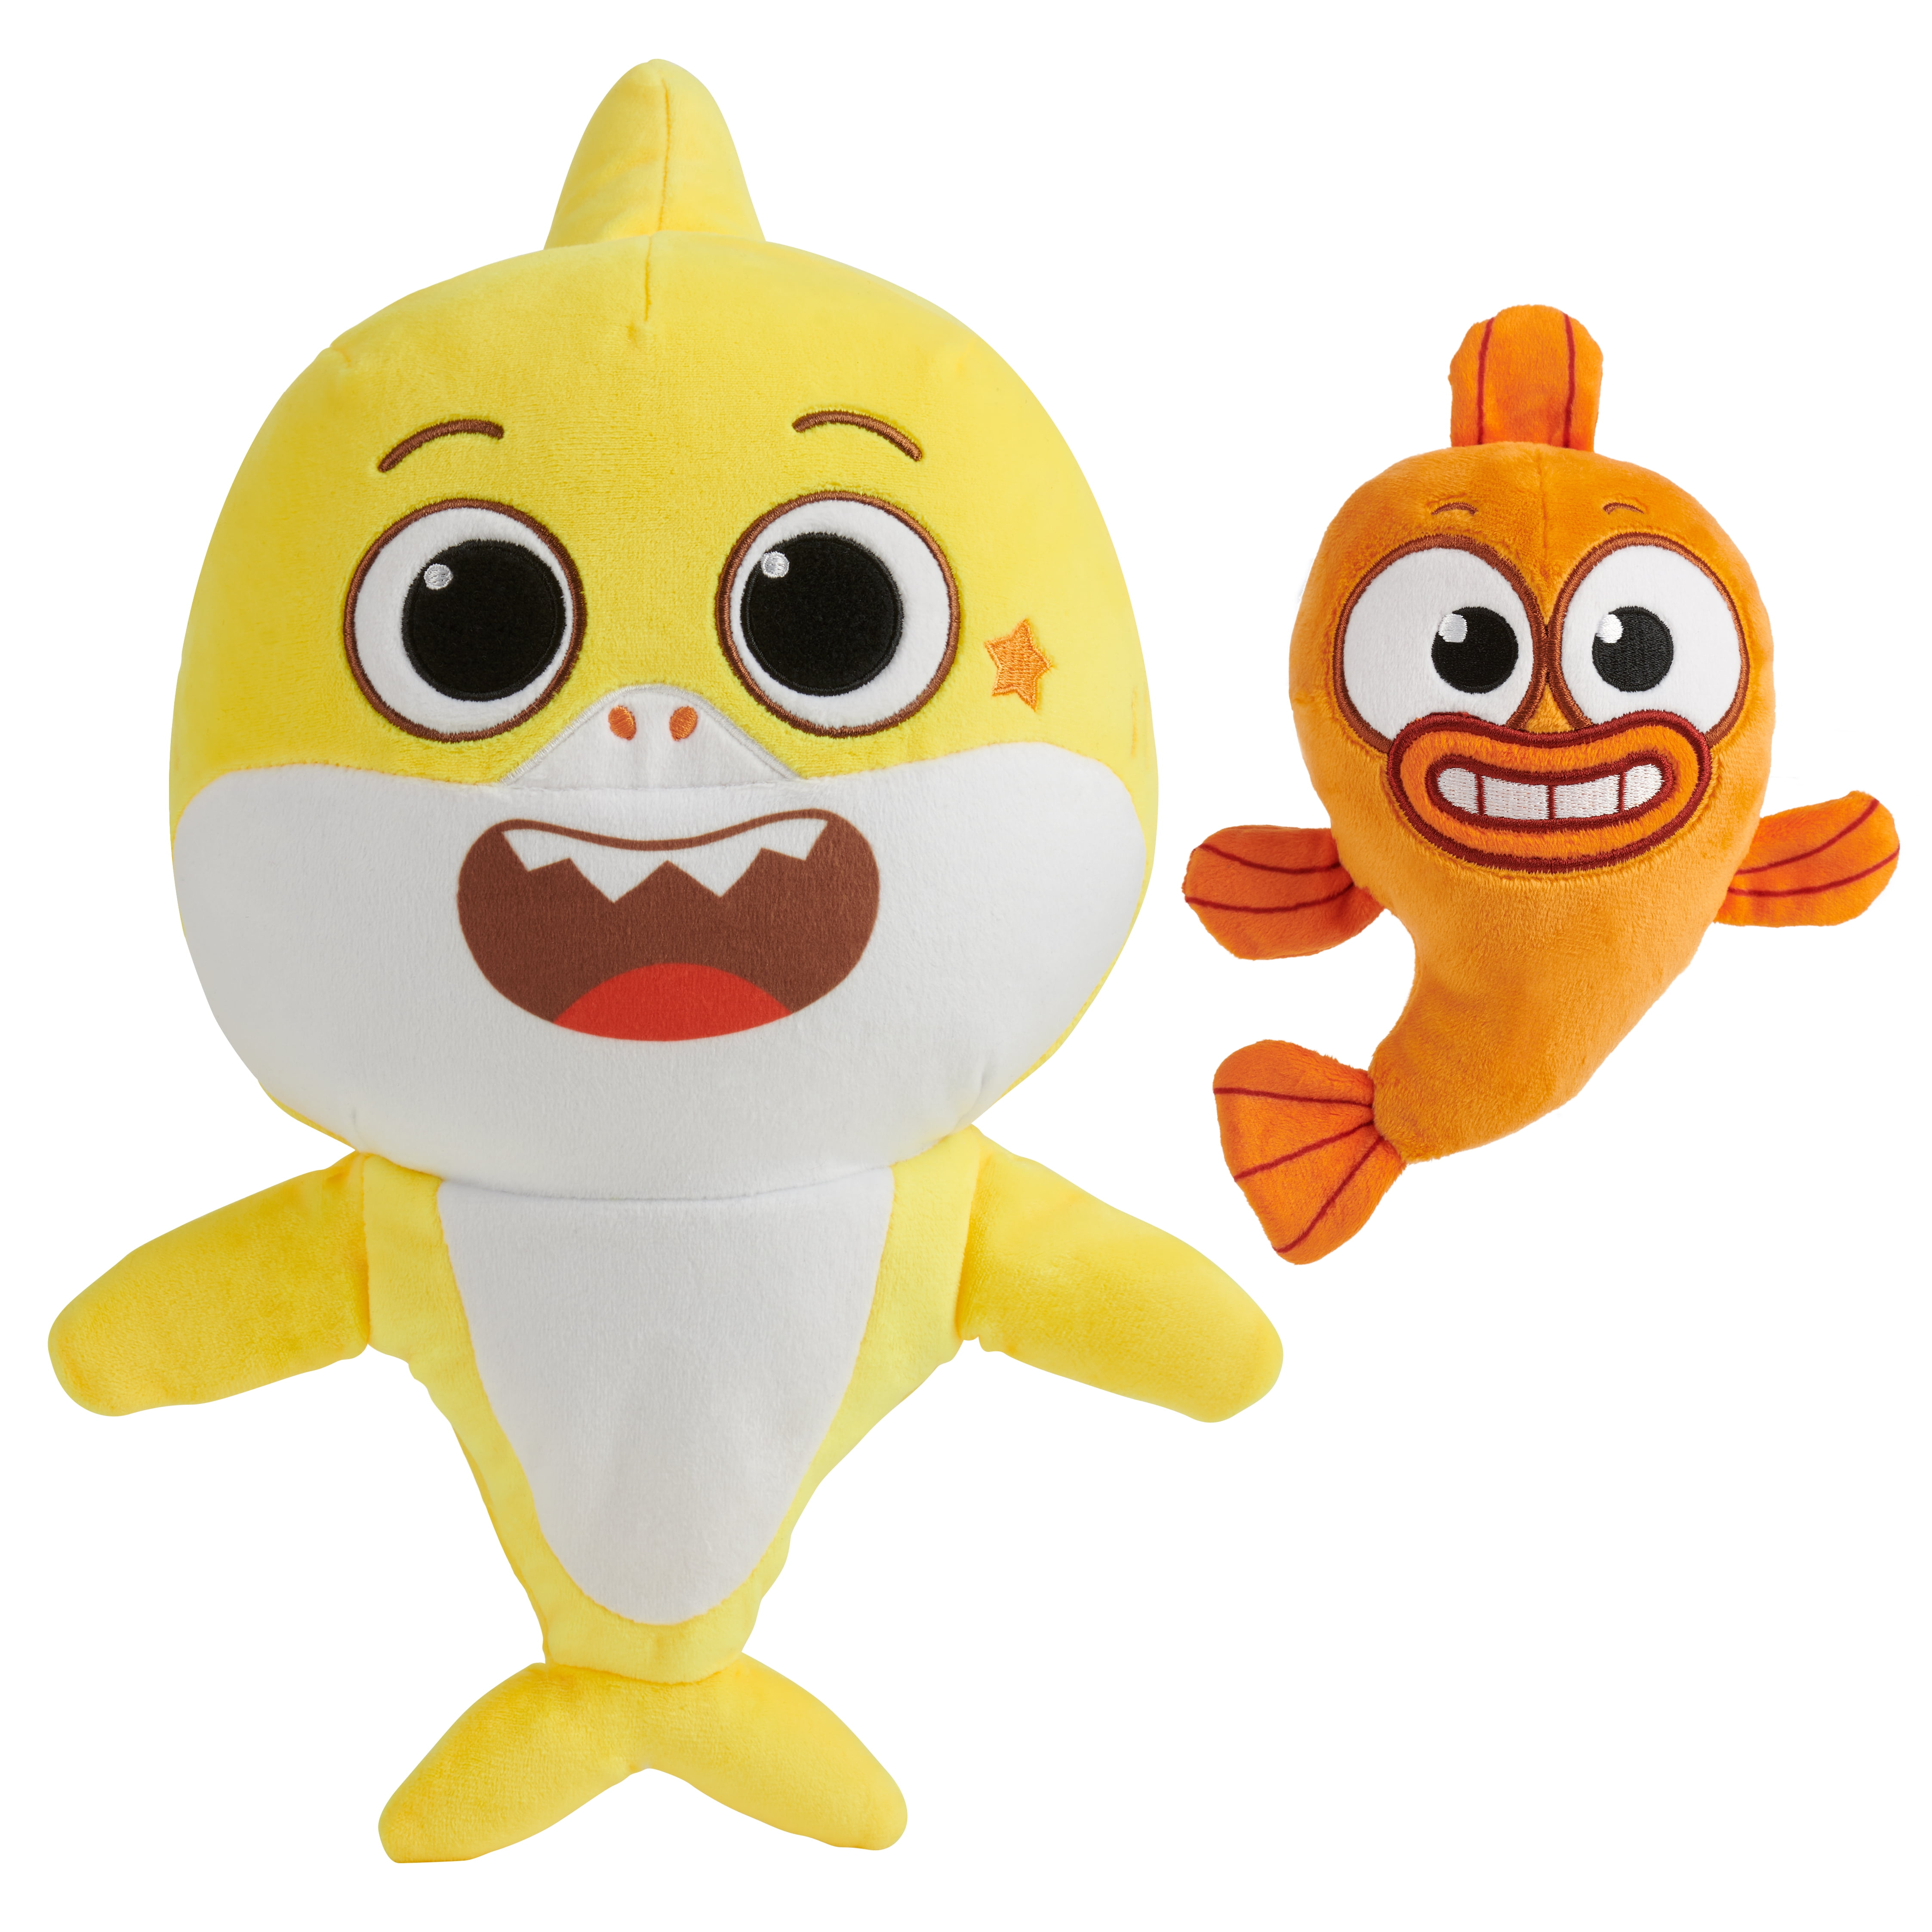 New PINKFONG Baby Shark Singing Plush English Yellow Doll WoWwee IN HAND 